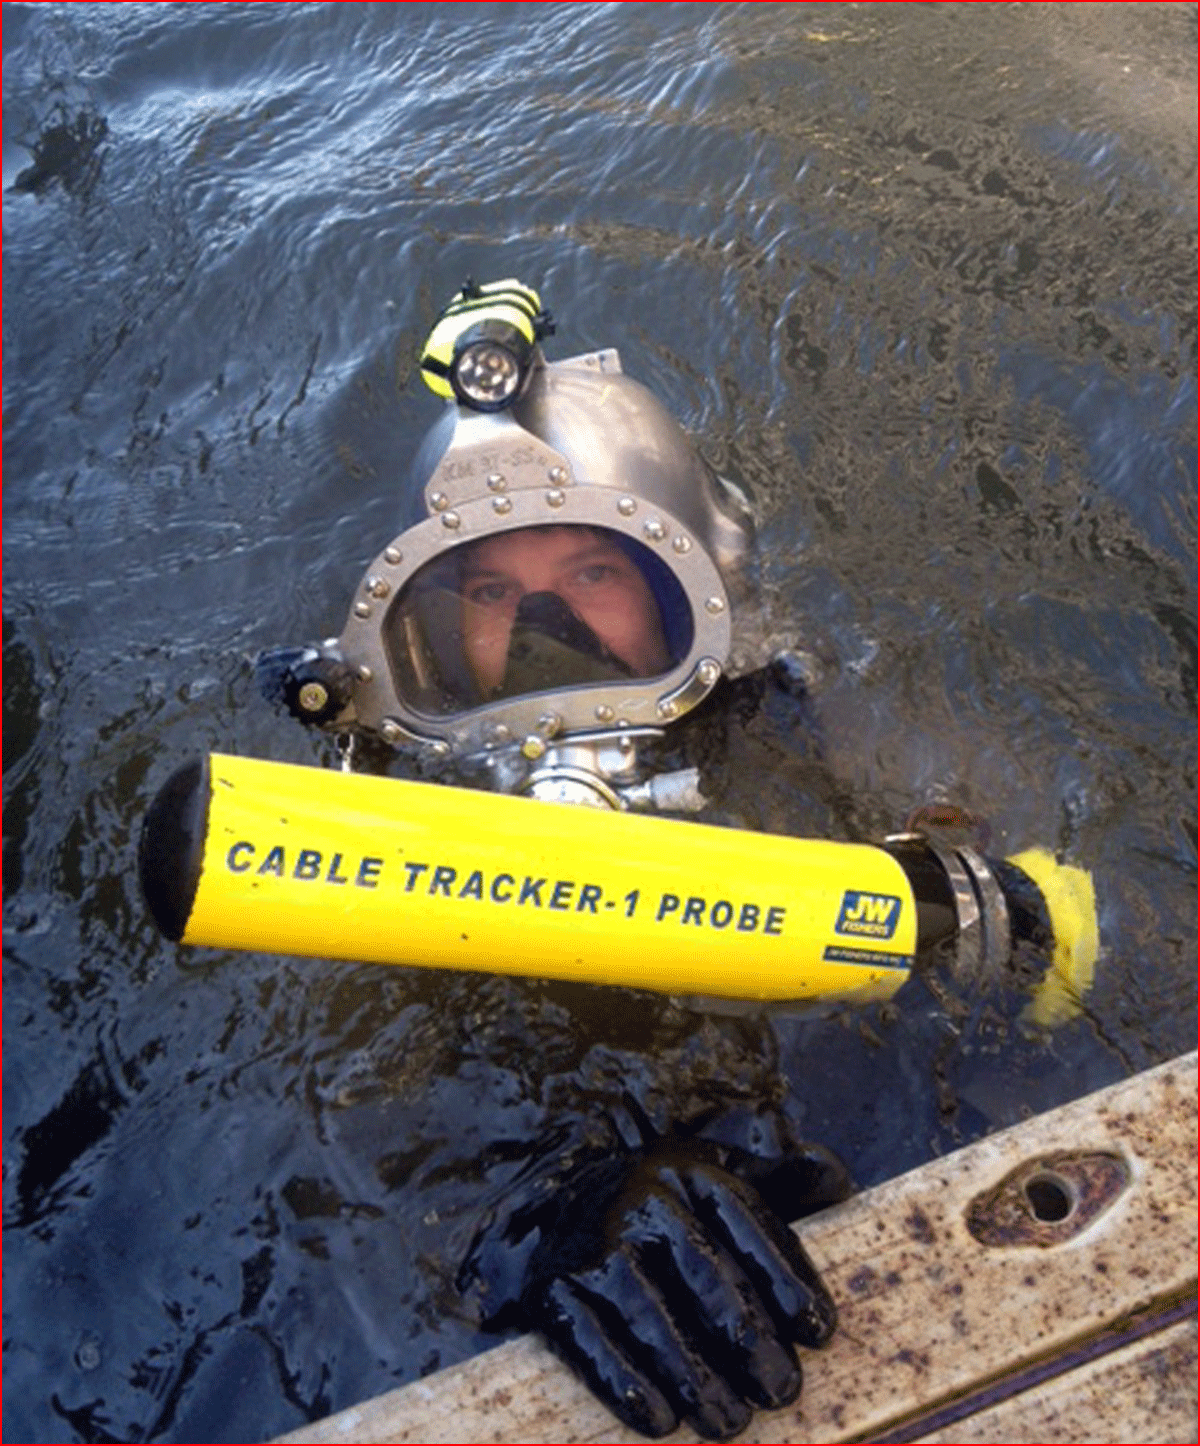 One person in surface of water holding Cable Tracker-1 Probe